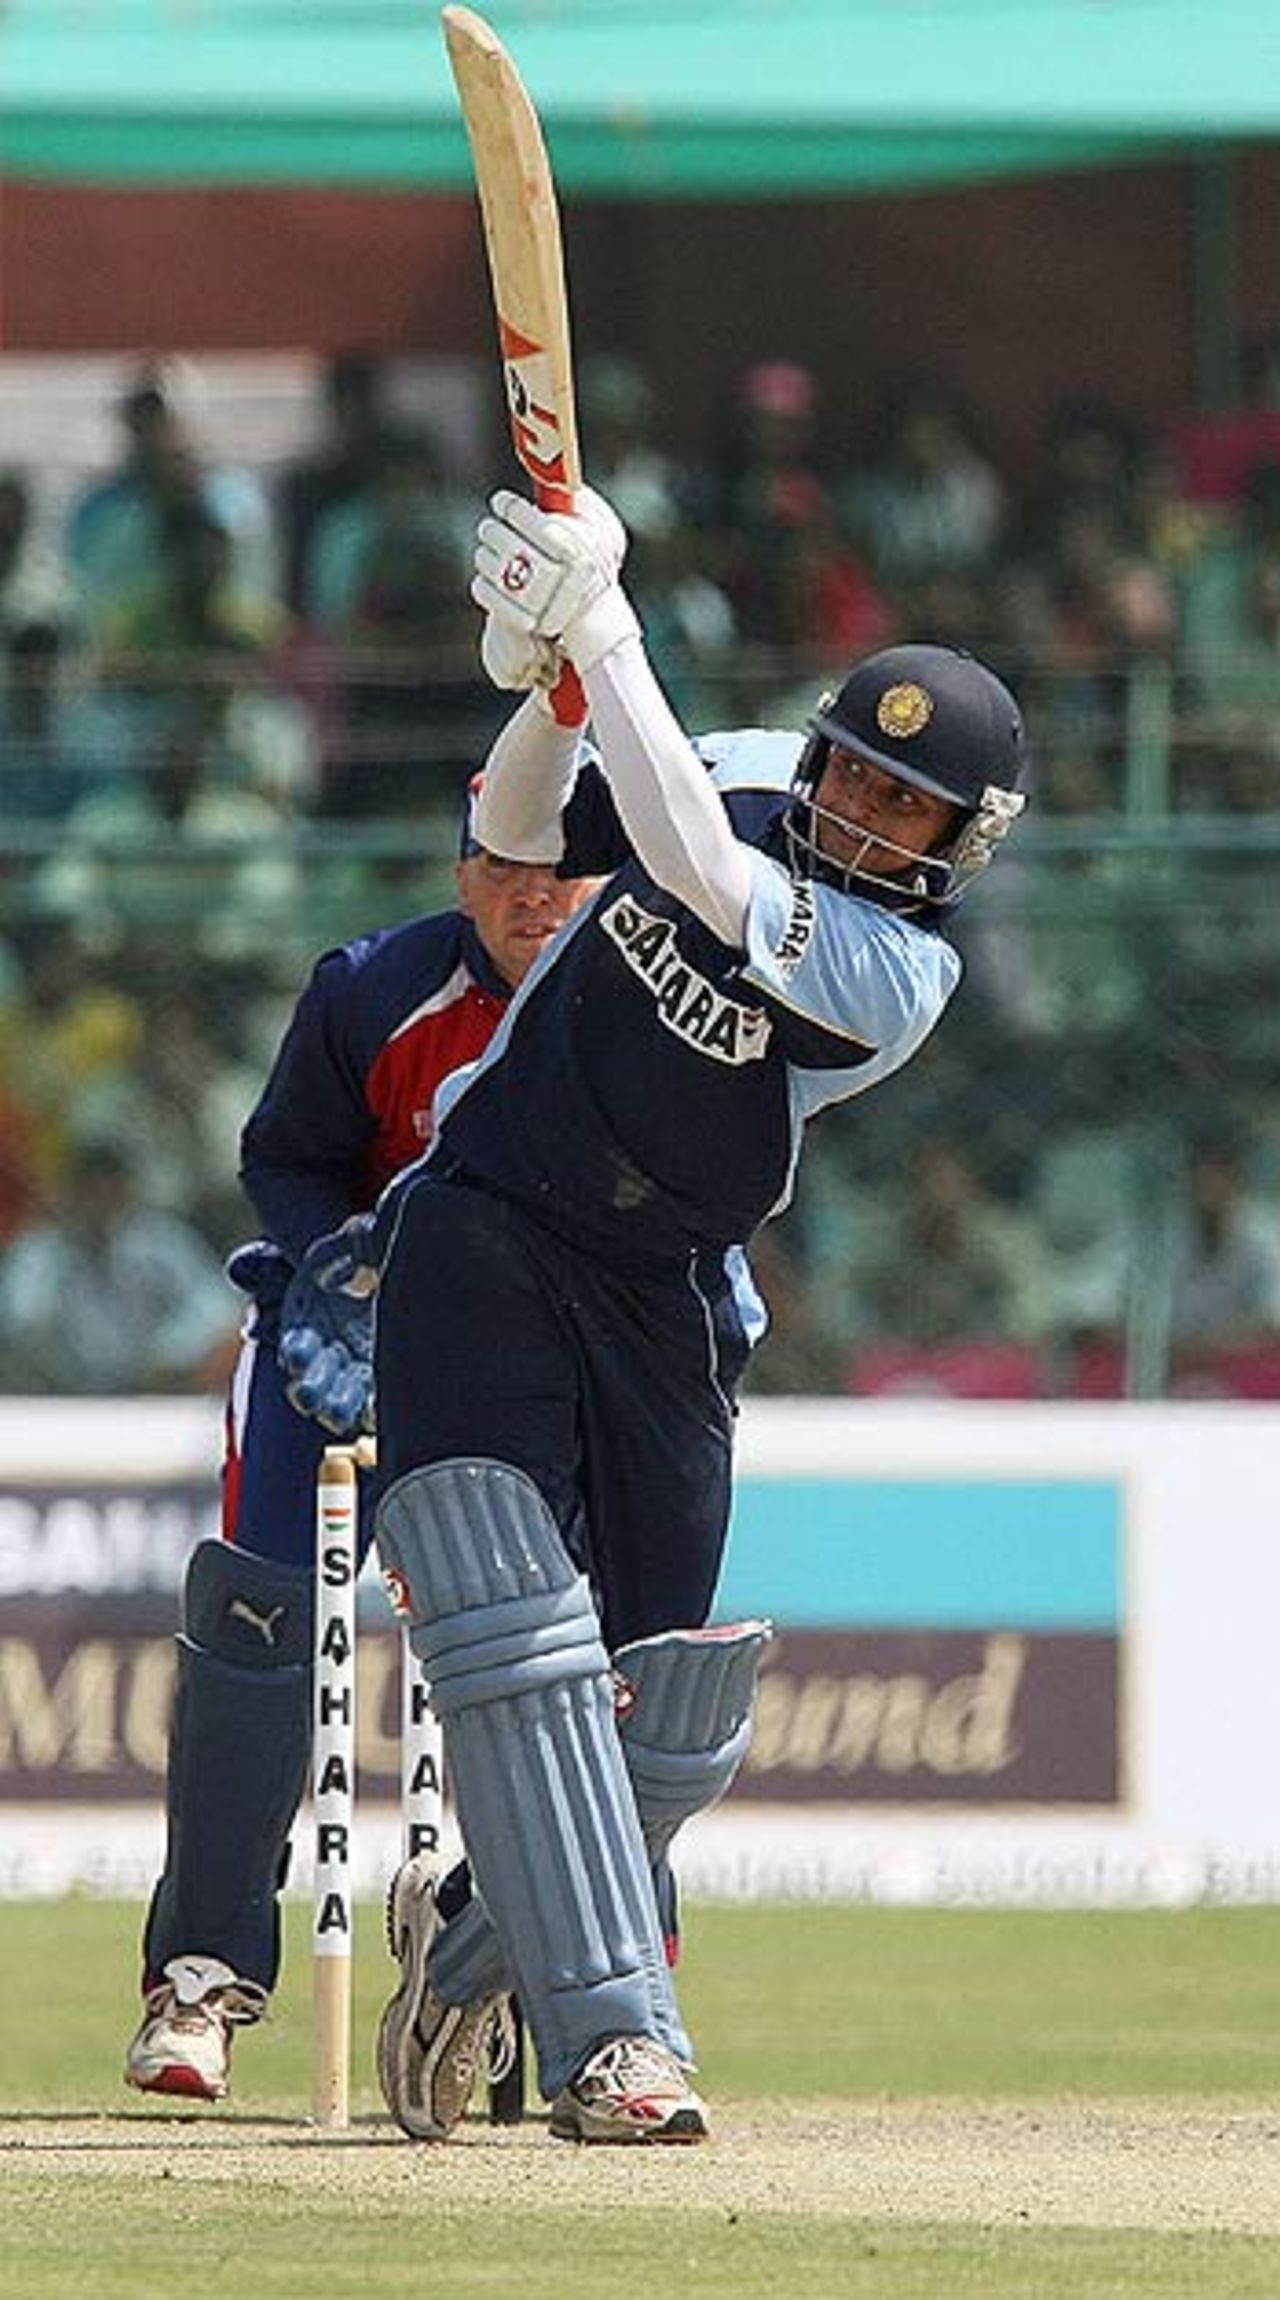 Suresh Raina lofts one off the legs during his 46-ball 49 against the England XI, Rajasthan Cricket Association President's XI v England XI, Jaipur, March 25, 2006